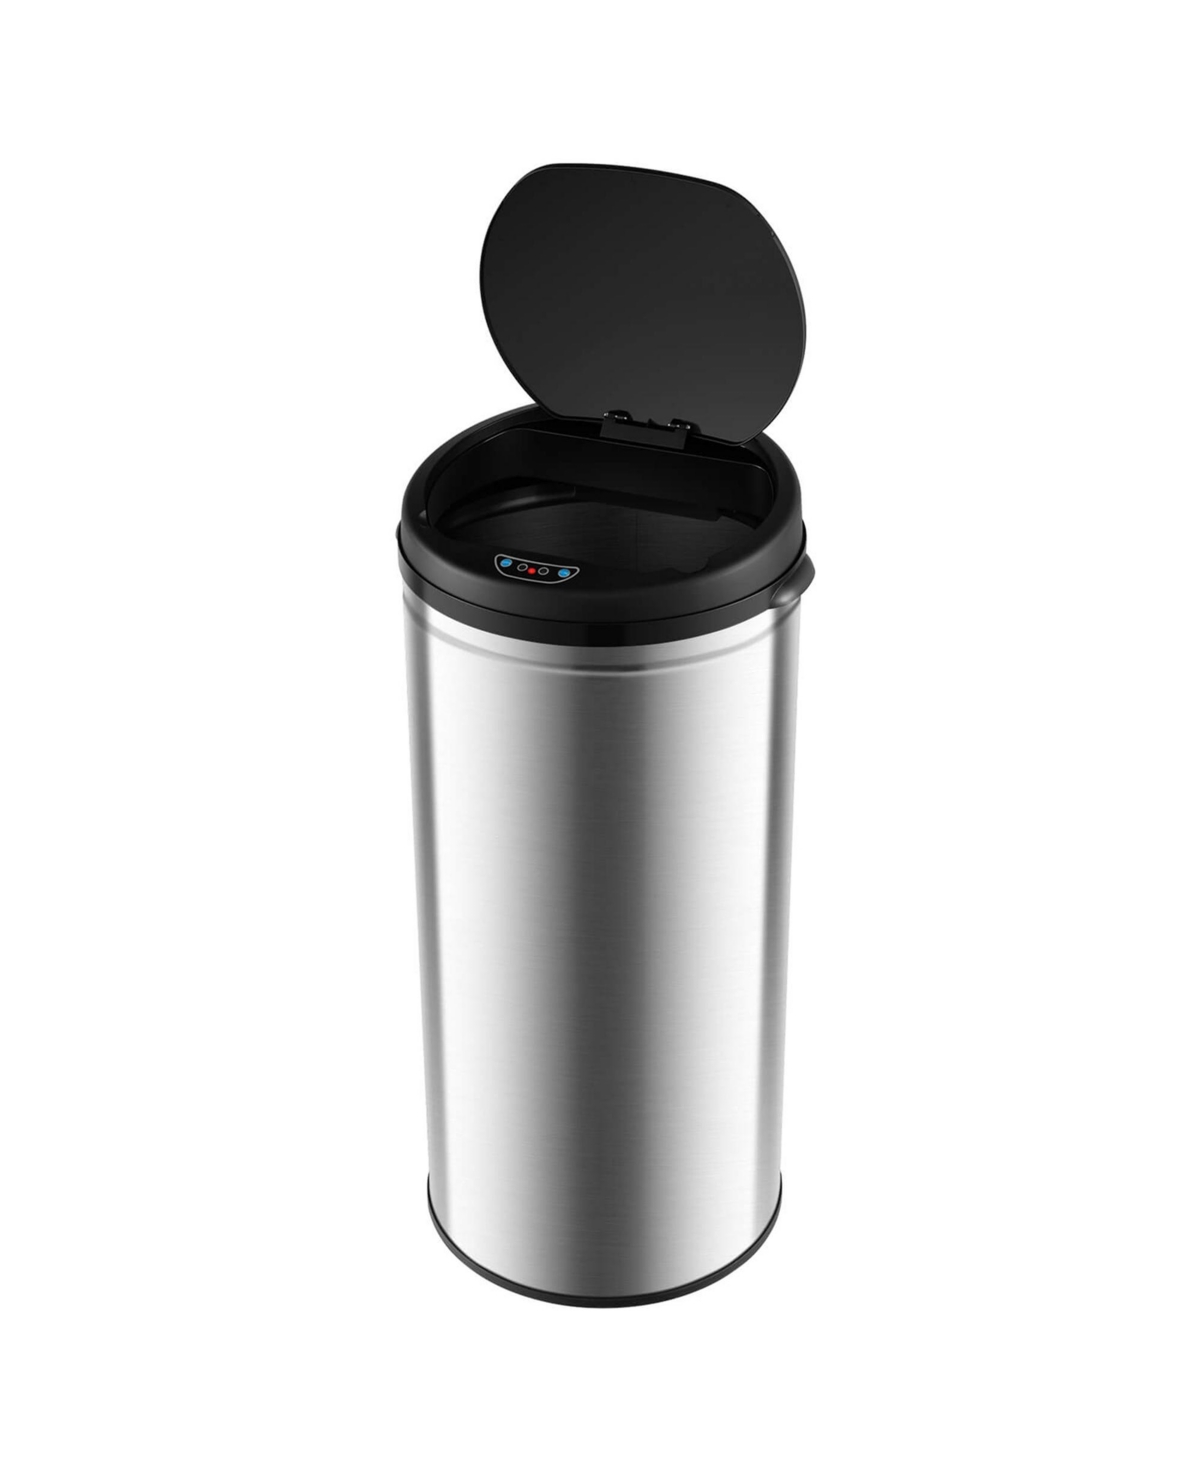 8 Gallon Automatic Trash Can Touchless Motion Sensor Waste Bin Battery Operated - Silver